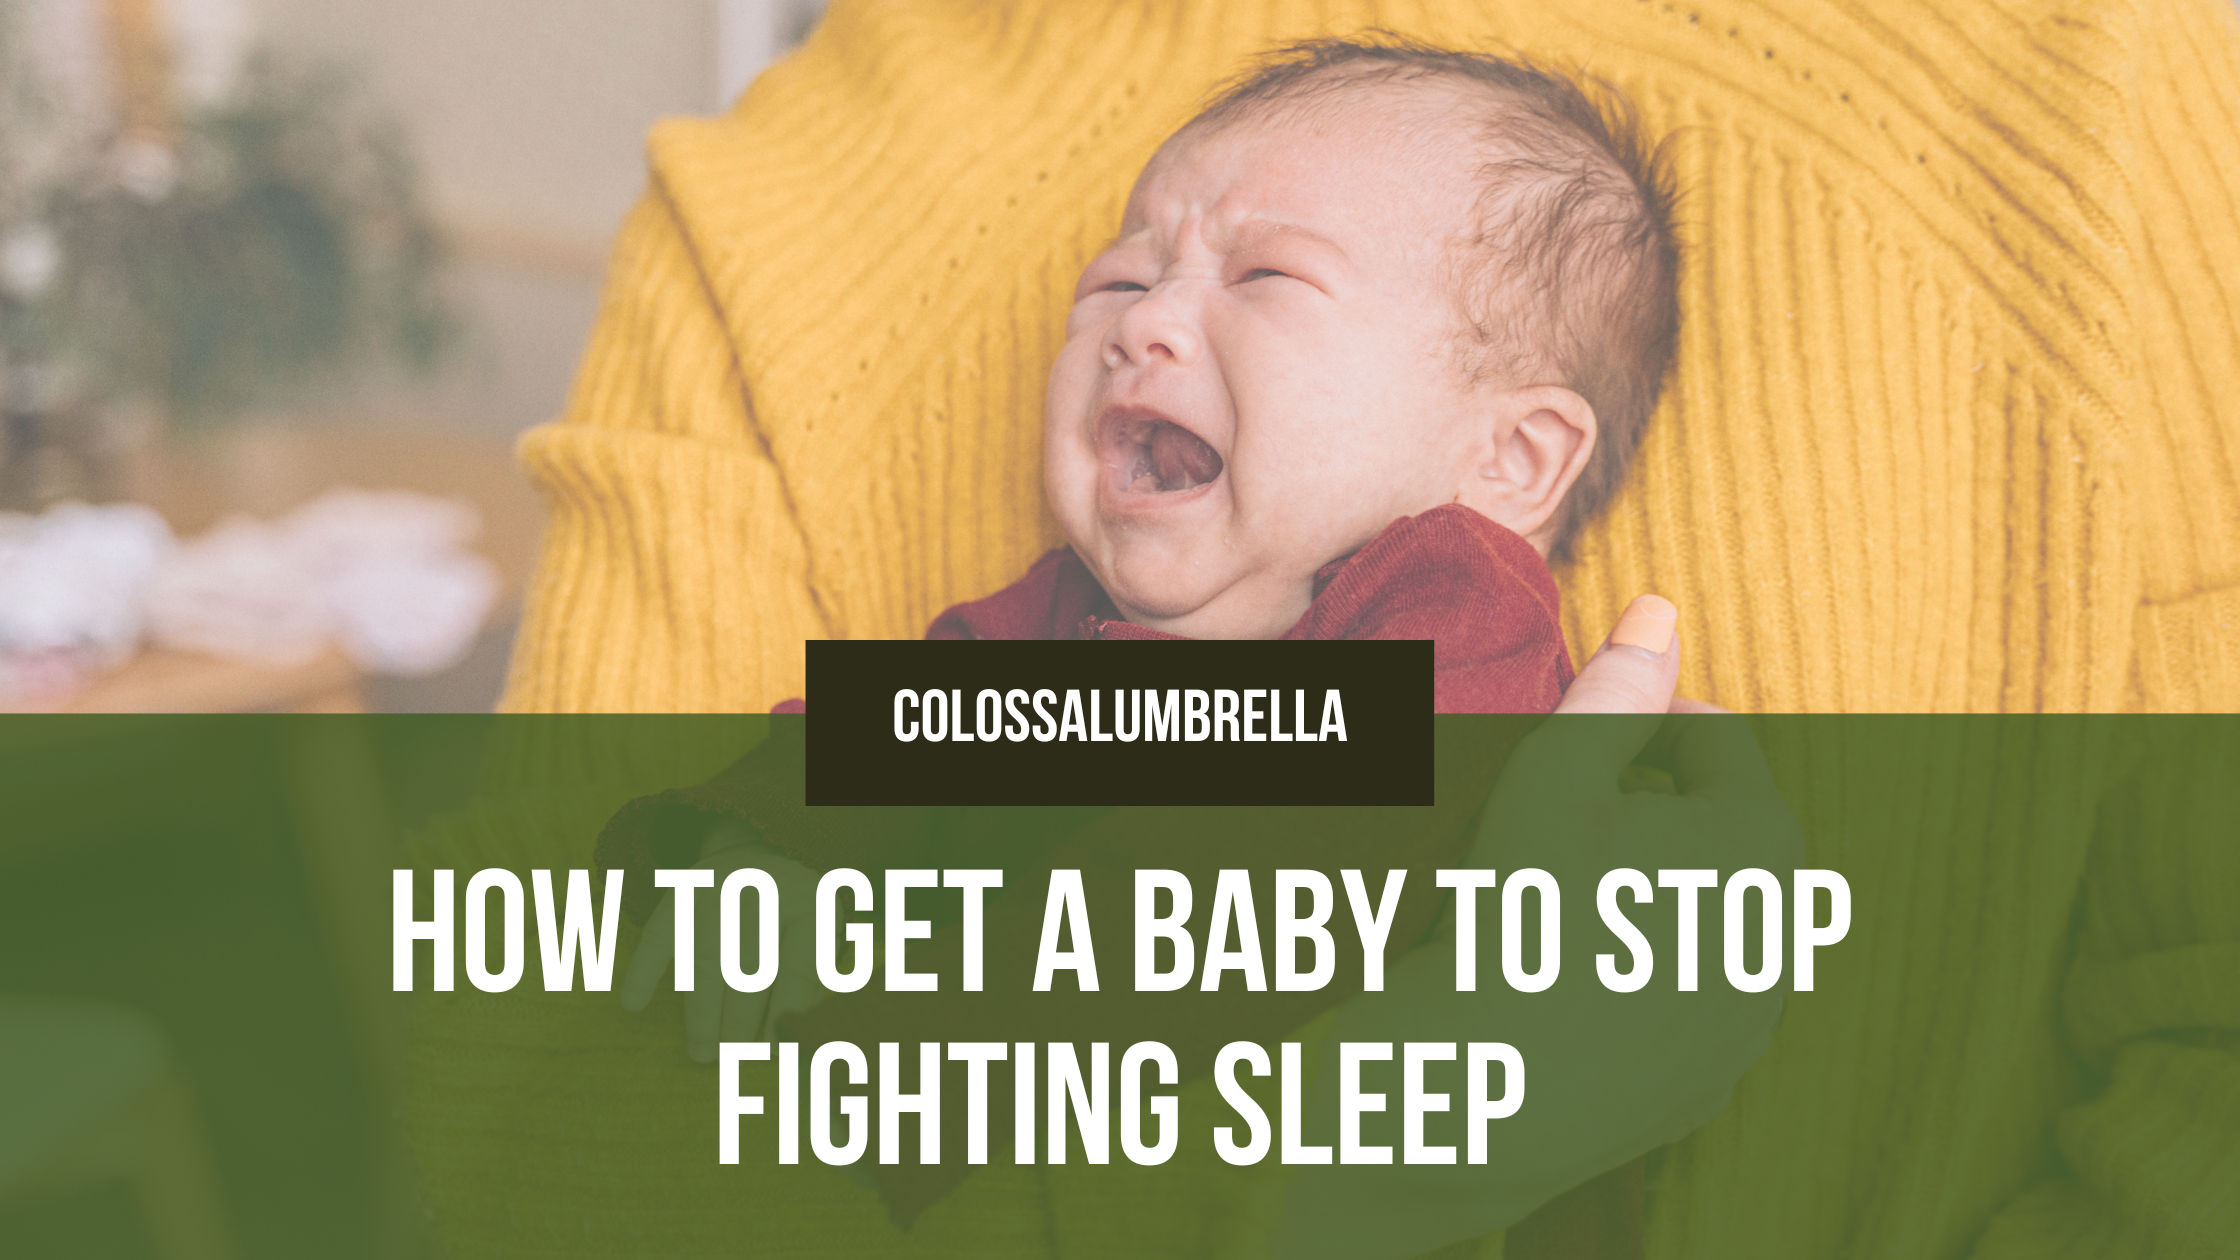 10 Simple Tips on How to get a baby to stop fighting sleep